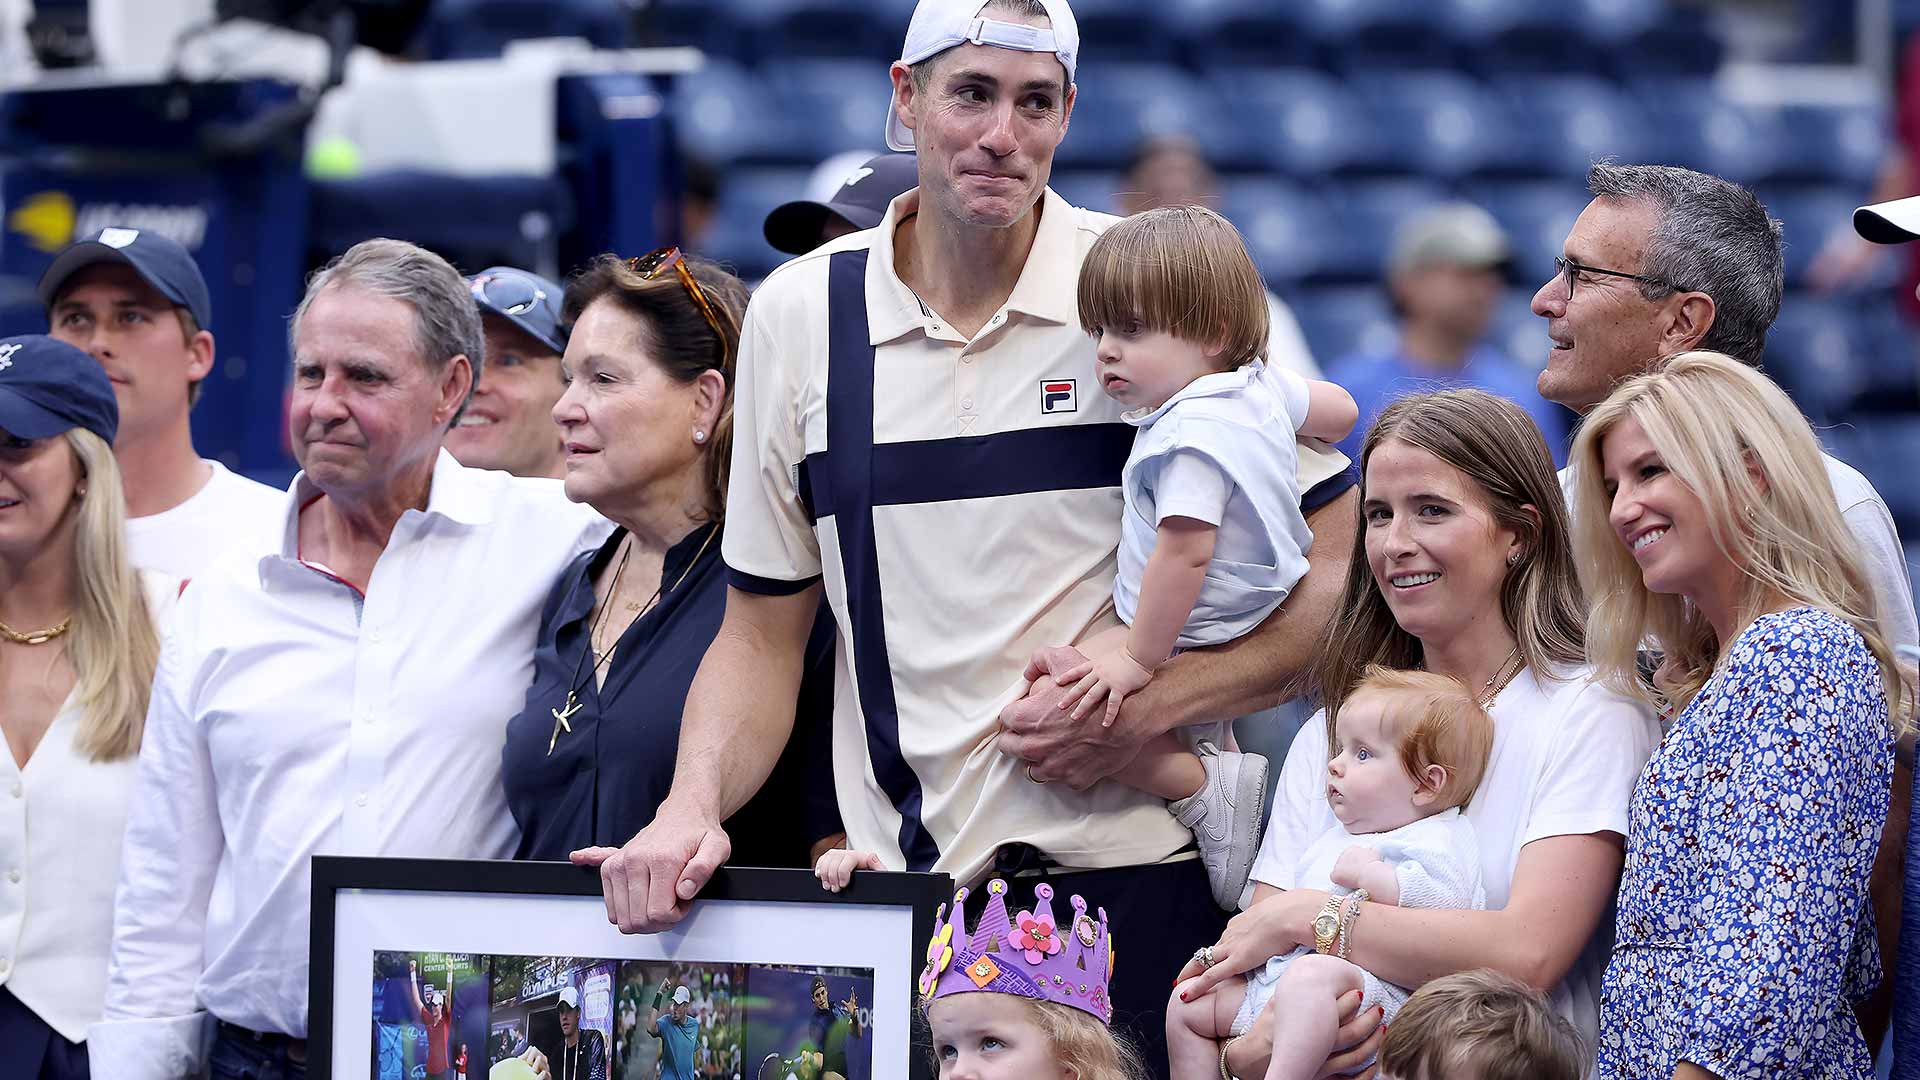 John Isner celebrates his first-round win at the US Open with his family and team.